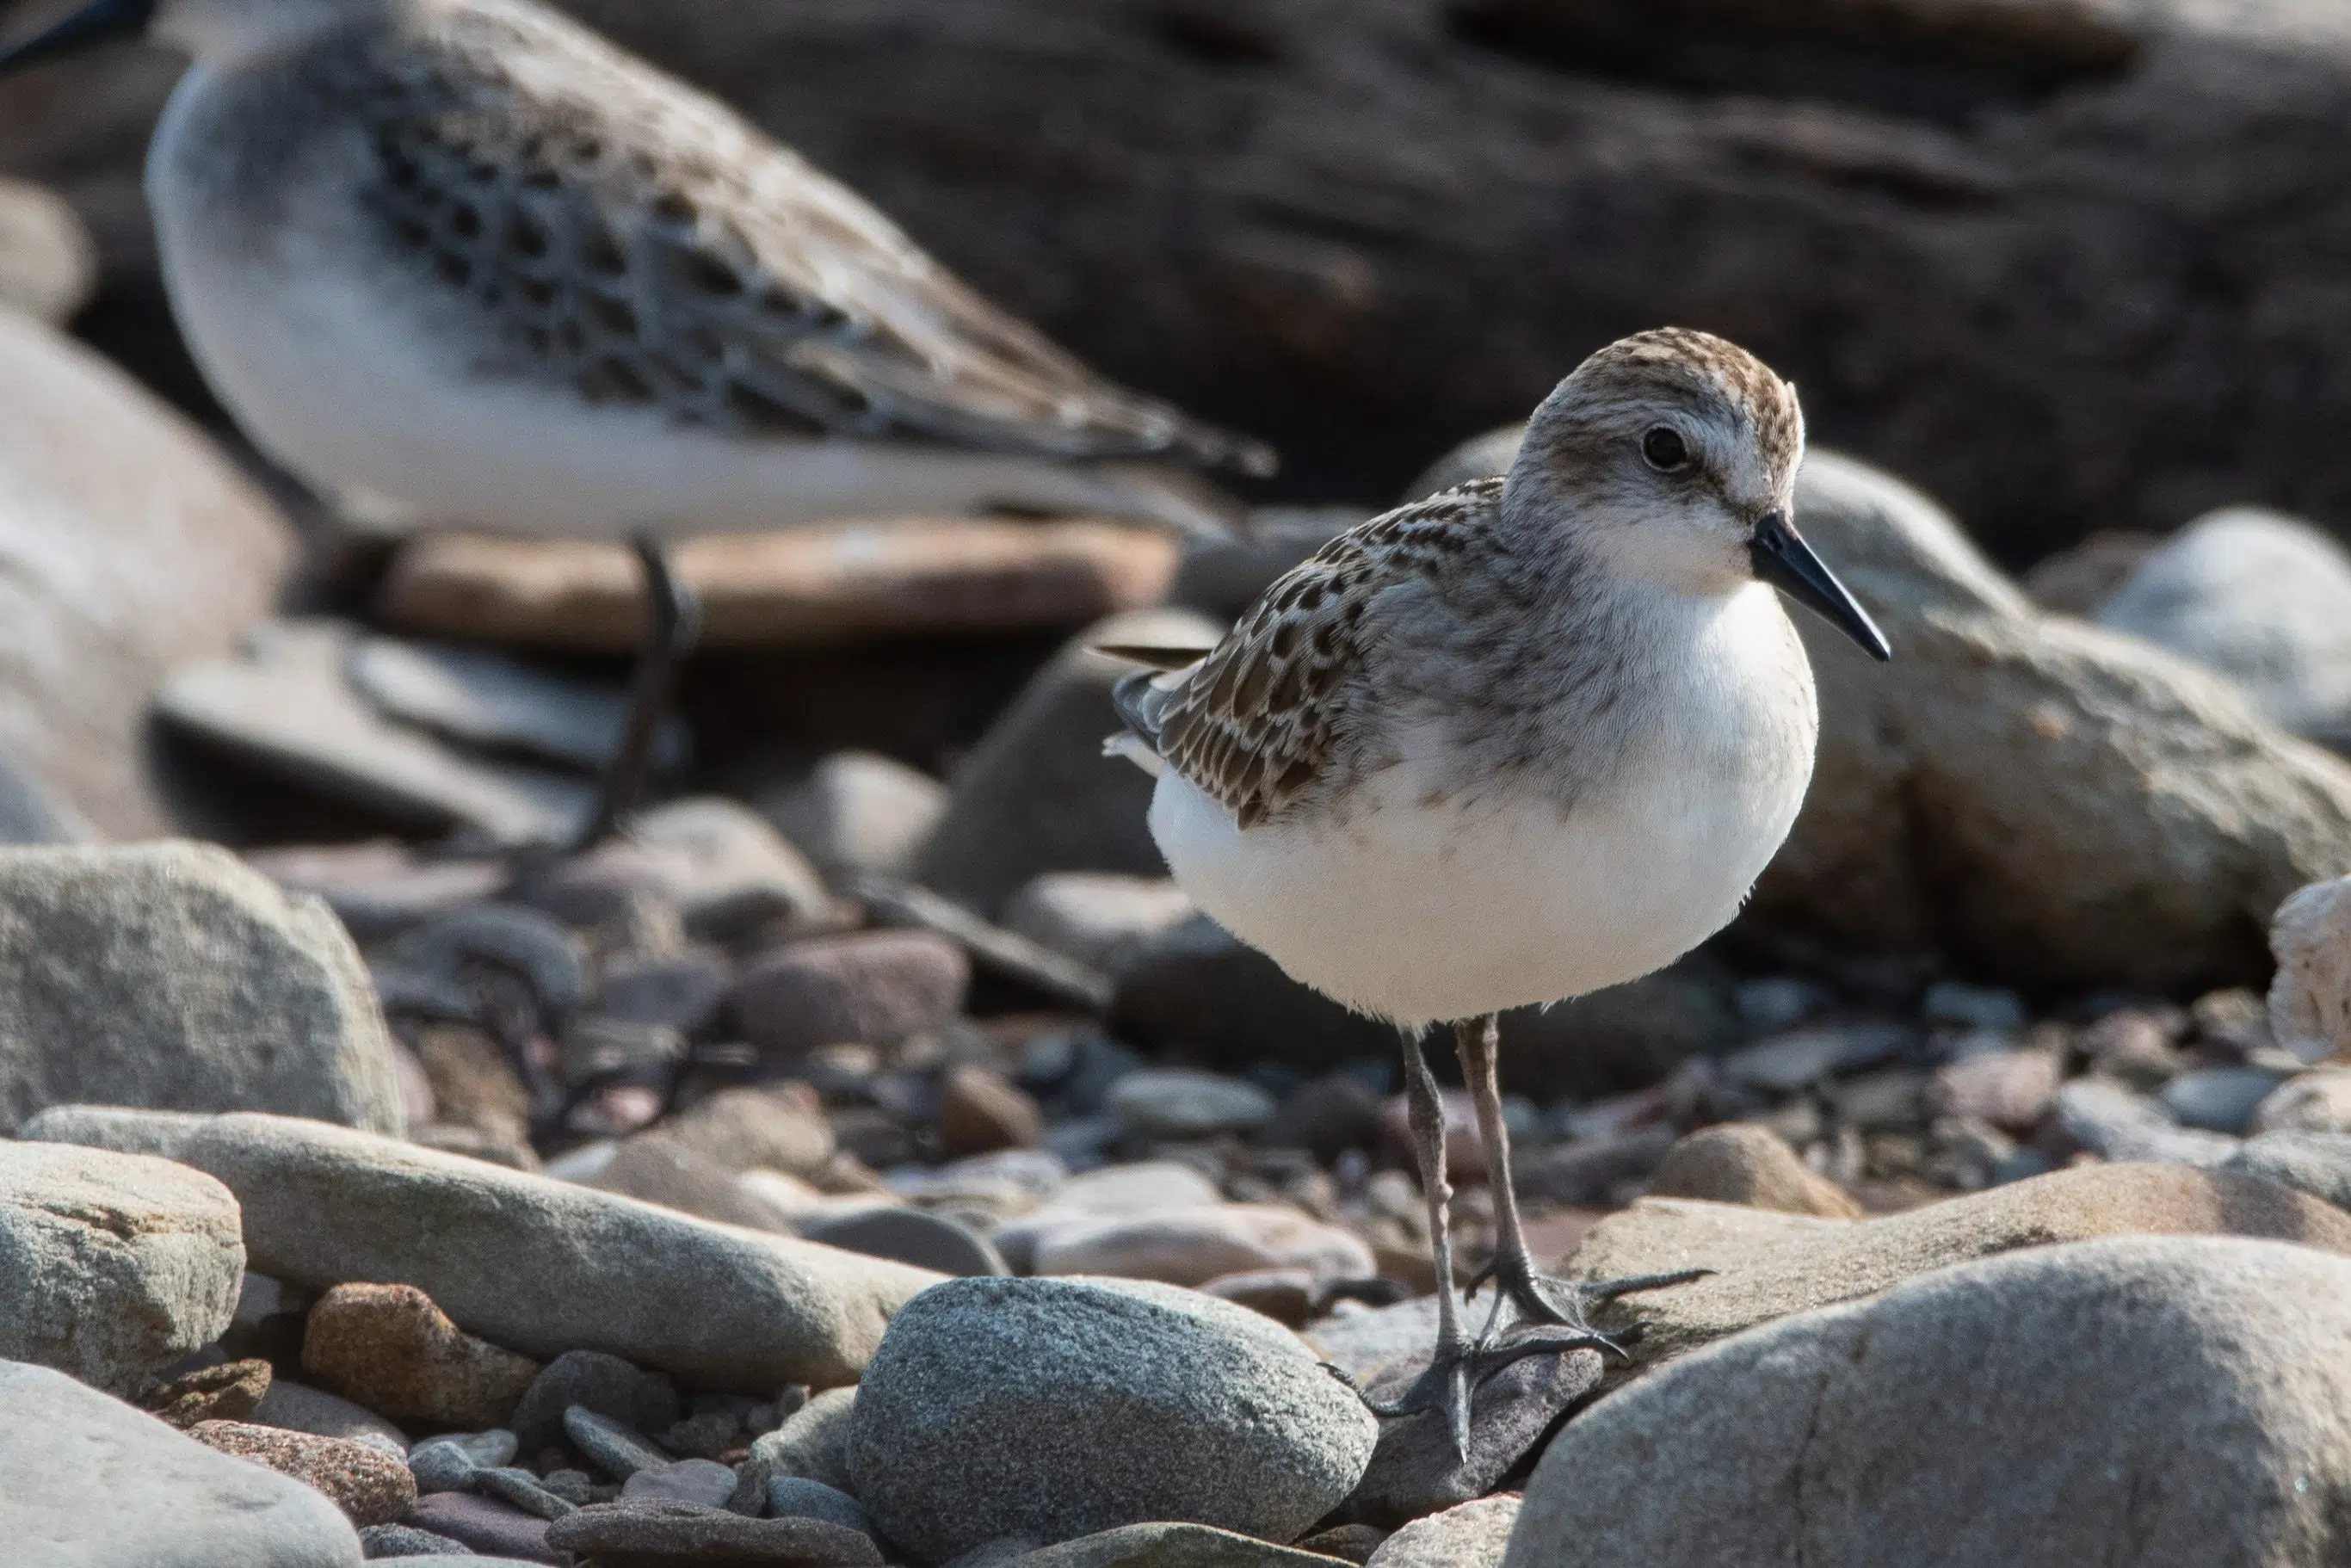 Semipalmated sandpipers return to Bay of Fundy